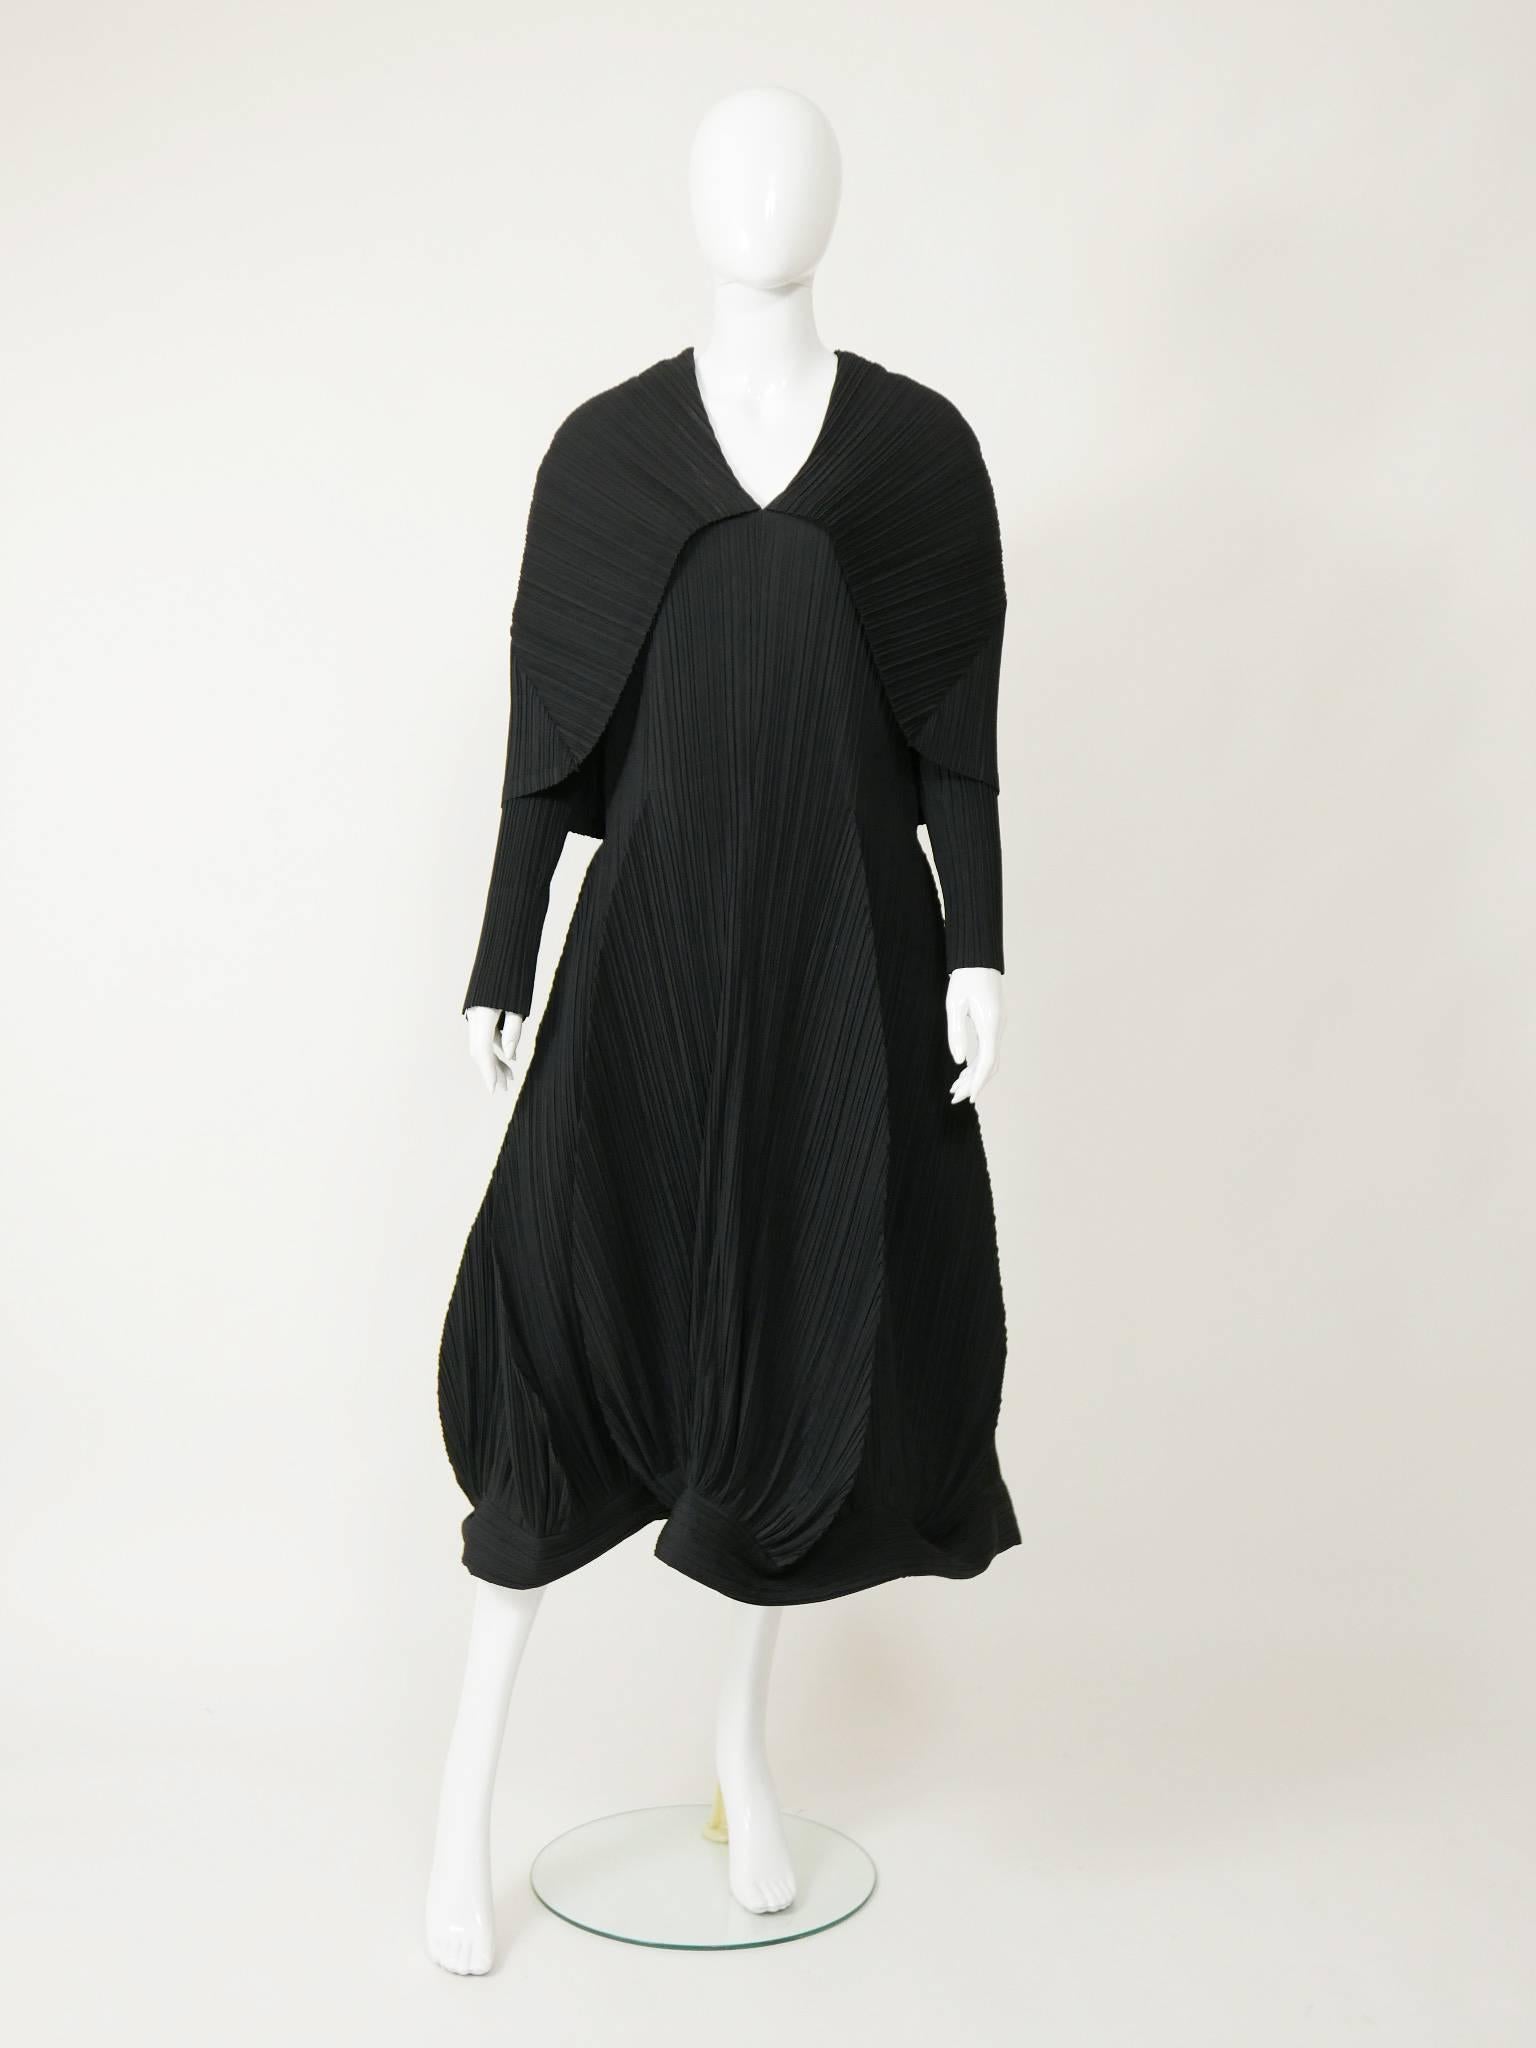 This amazing dress from 1985 collection by Issey Miyake is exposed to The Metropolitan Museum of Art . This is an early example of the reverse pleating technique he developed in the 1980s, and recently featured in the exhibition 